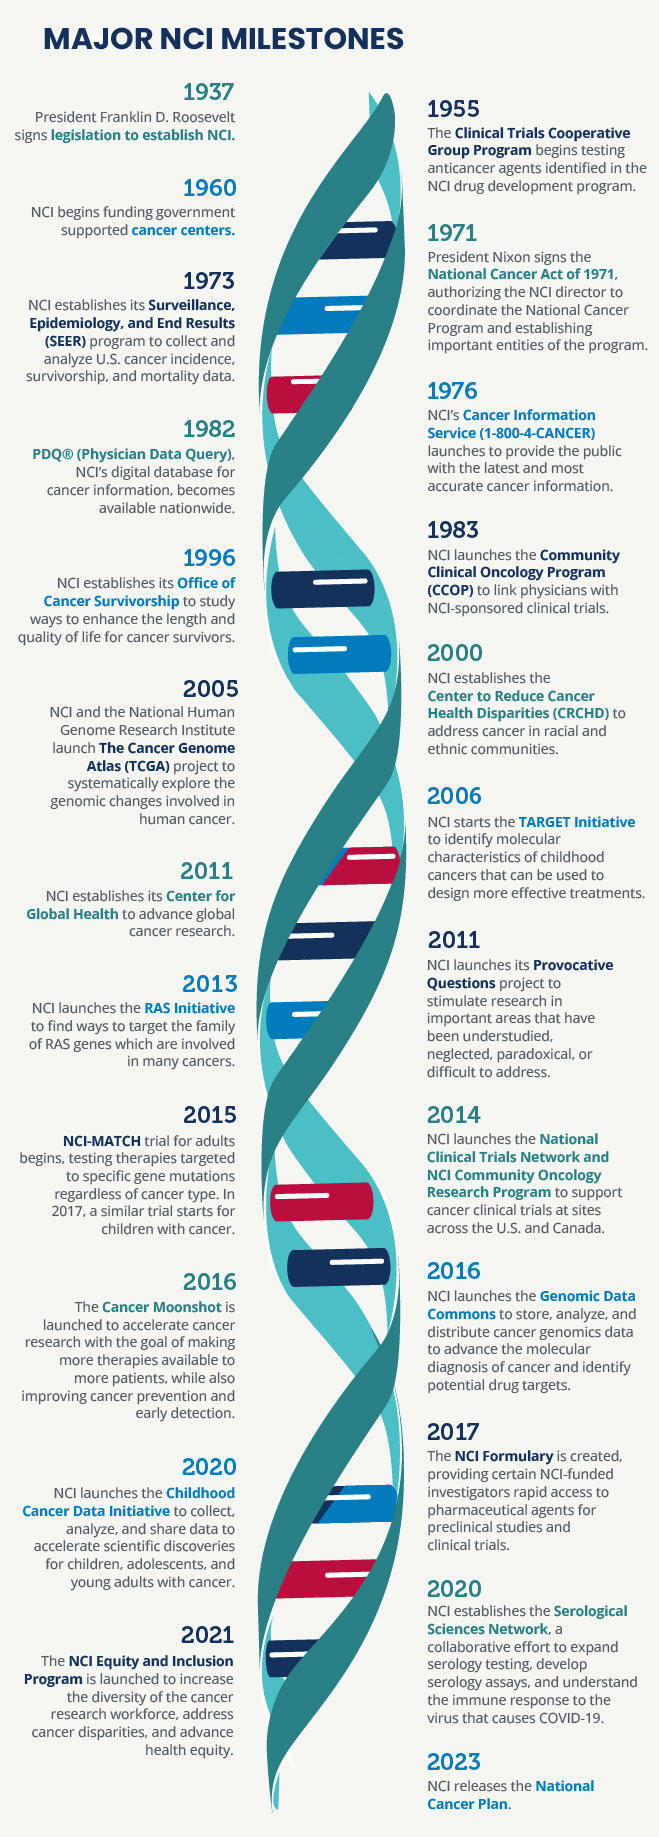 An infographic highlighting major events in the history of the National Cancer Institute (NCI), which is the federal government's principal agency for cancer research and training. NCI leads, conducts, and supports cancer research across the nation to advance scientific knowledge and help all people live longer, healthier lives.